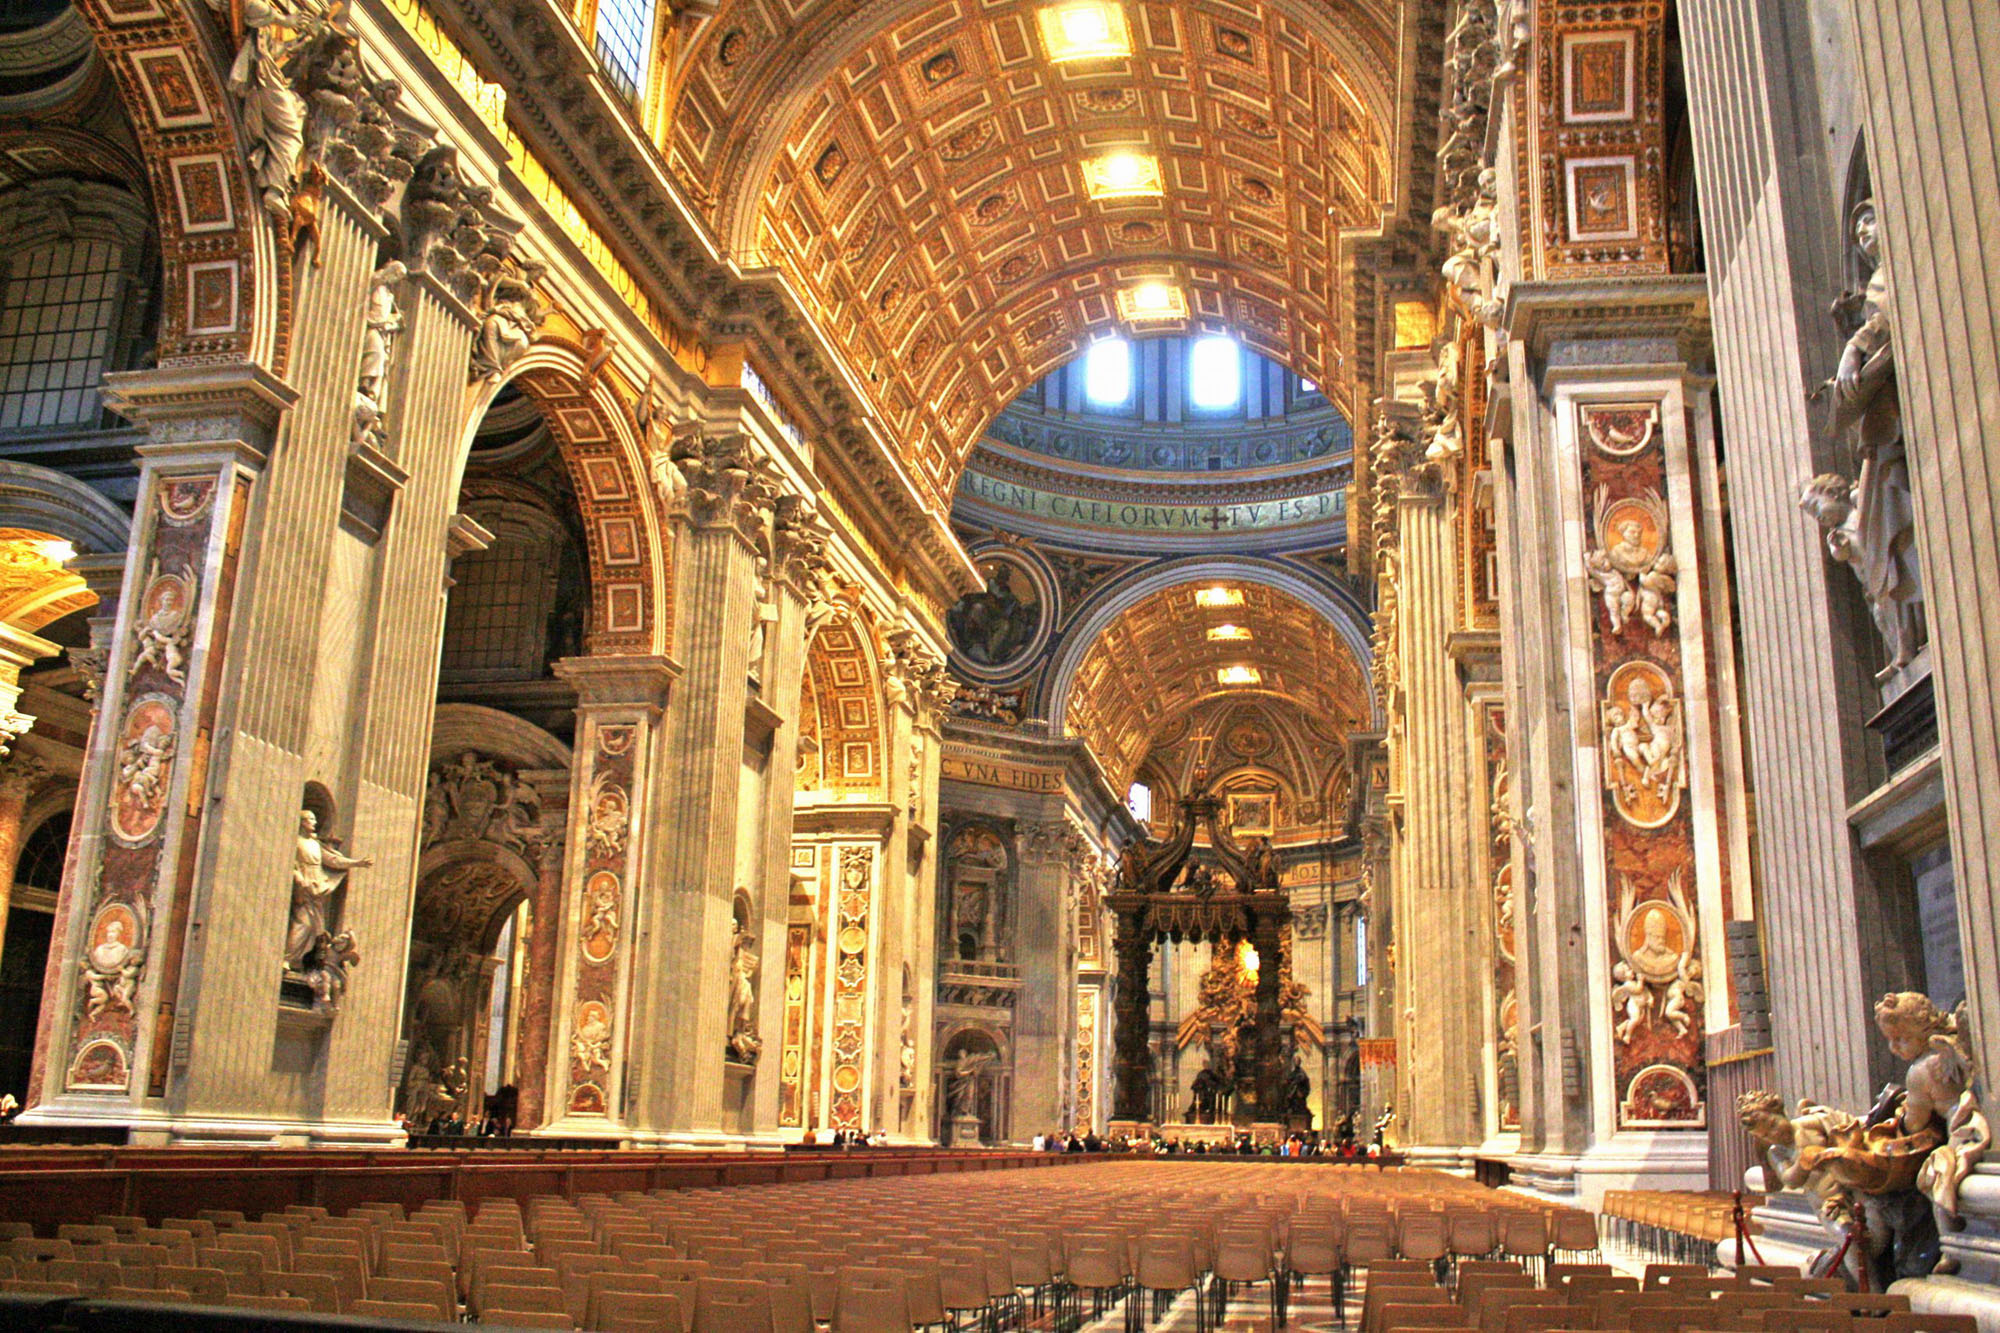 Old St. Peter's Basilica